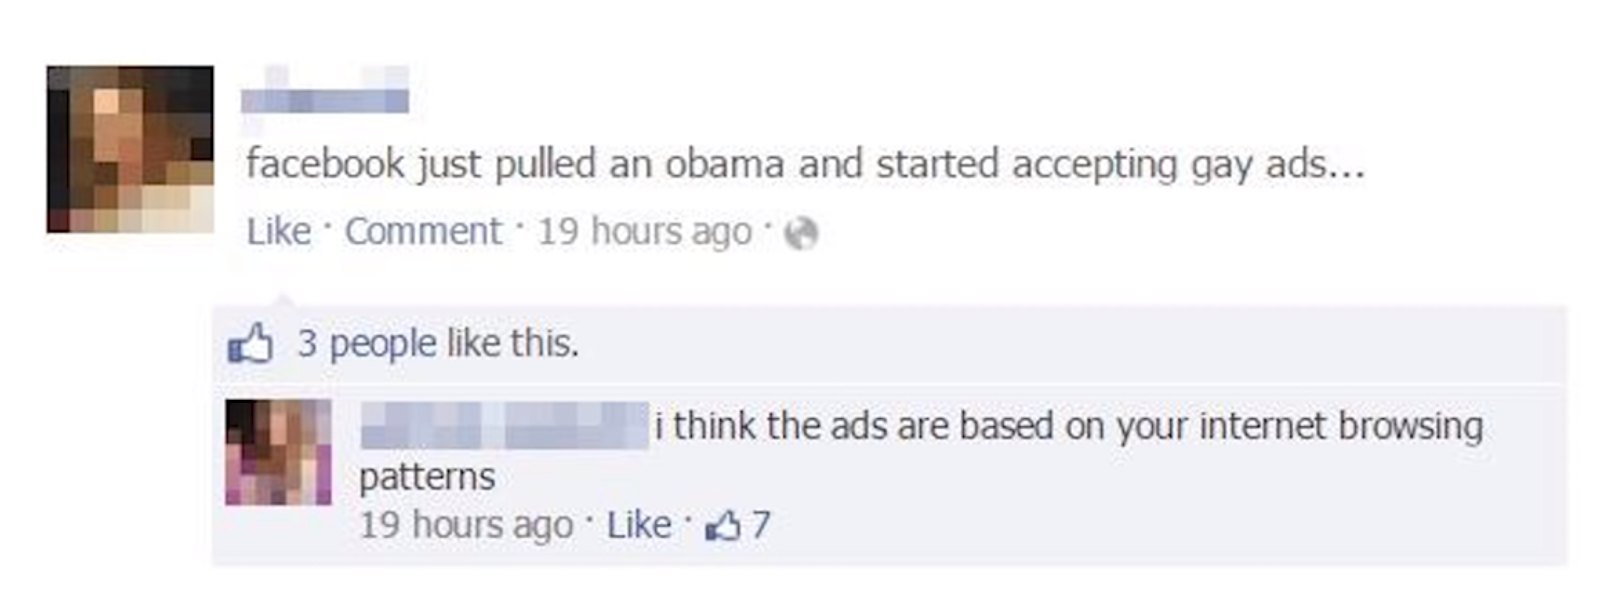 facebook just pulled an obama and started accepting gay ads.... i think the ads are based on your internet browsing patterns